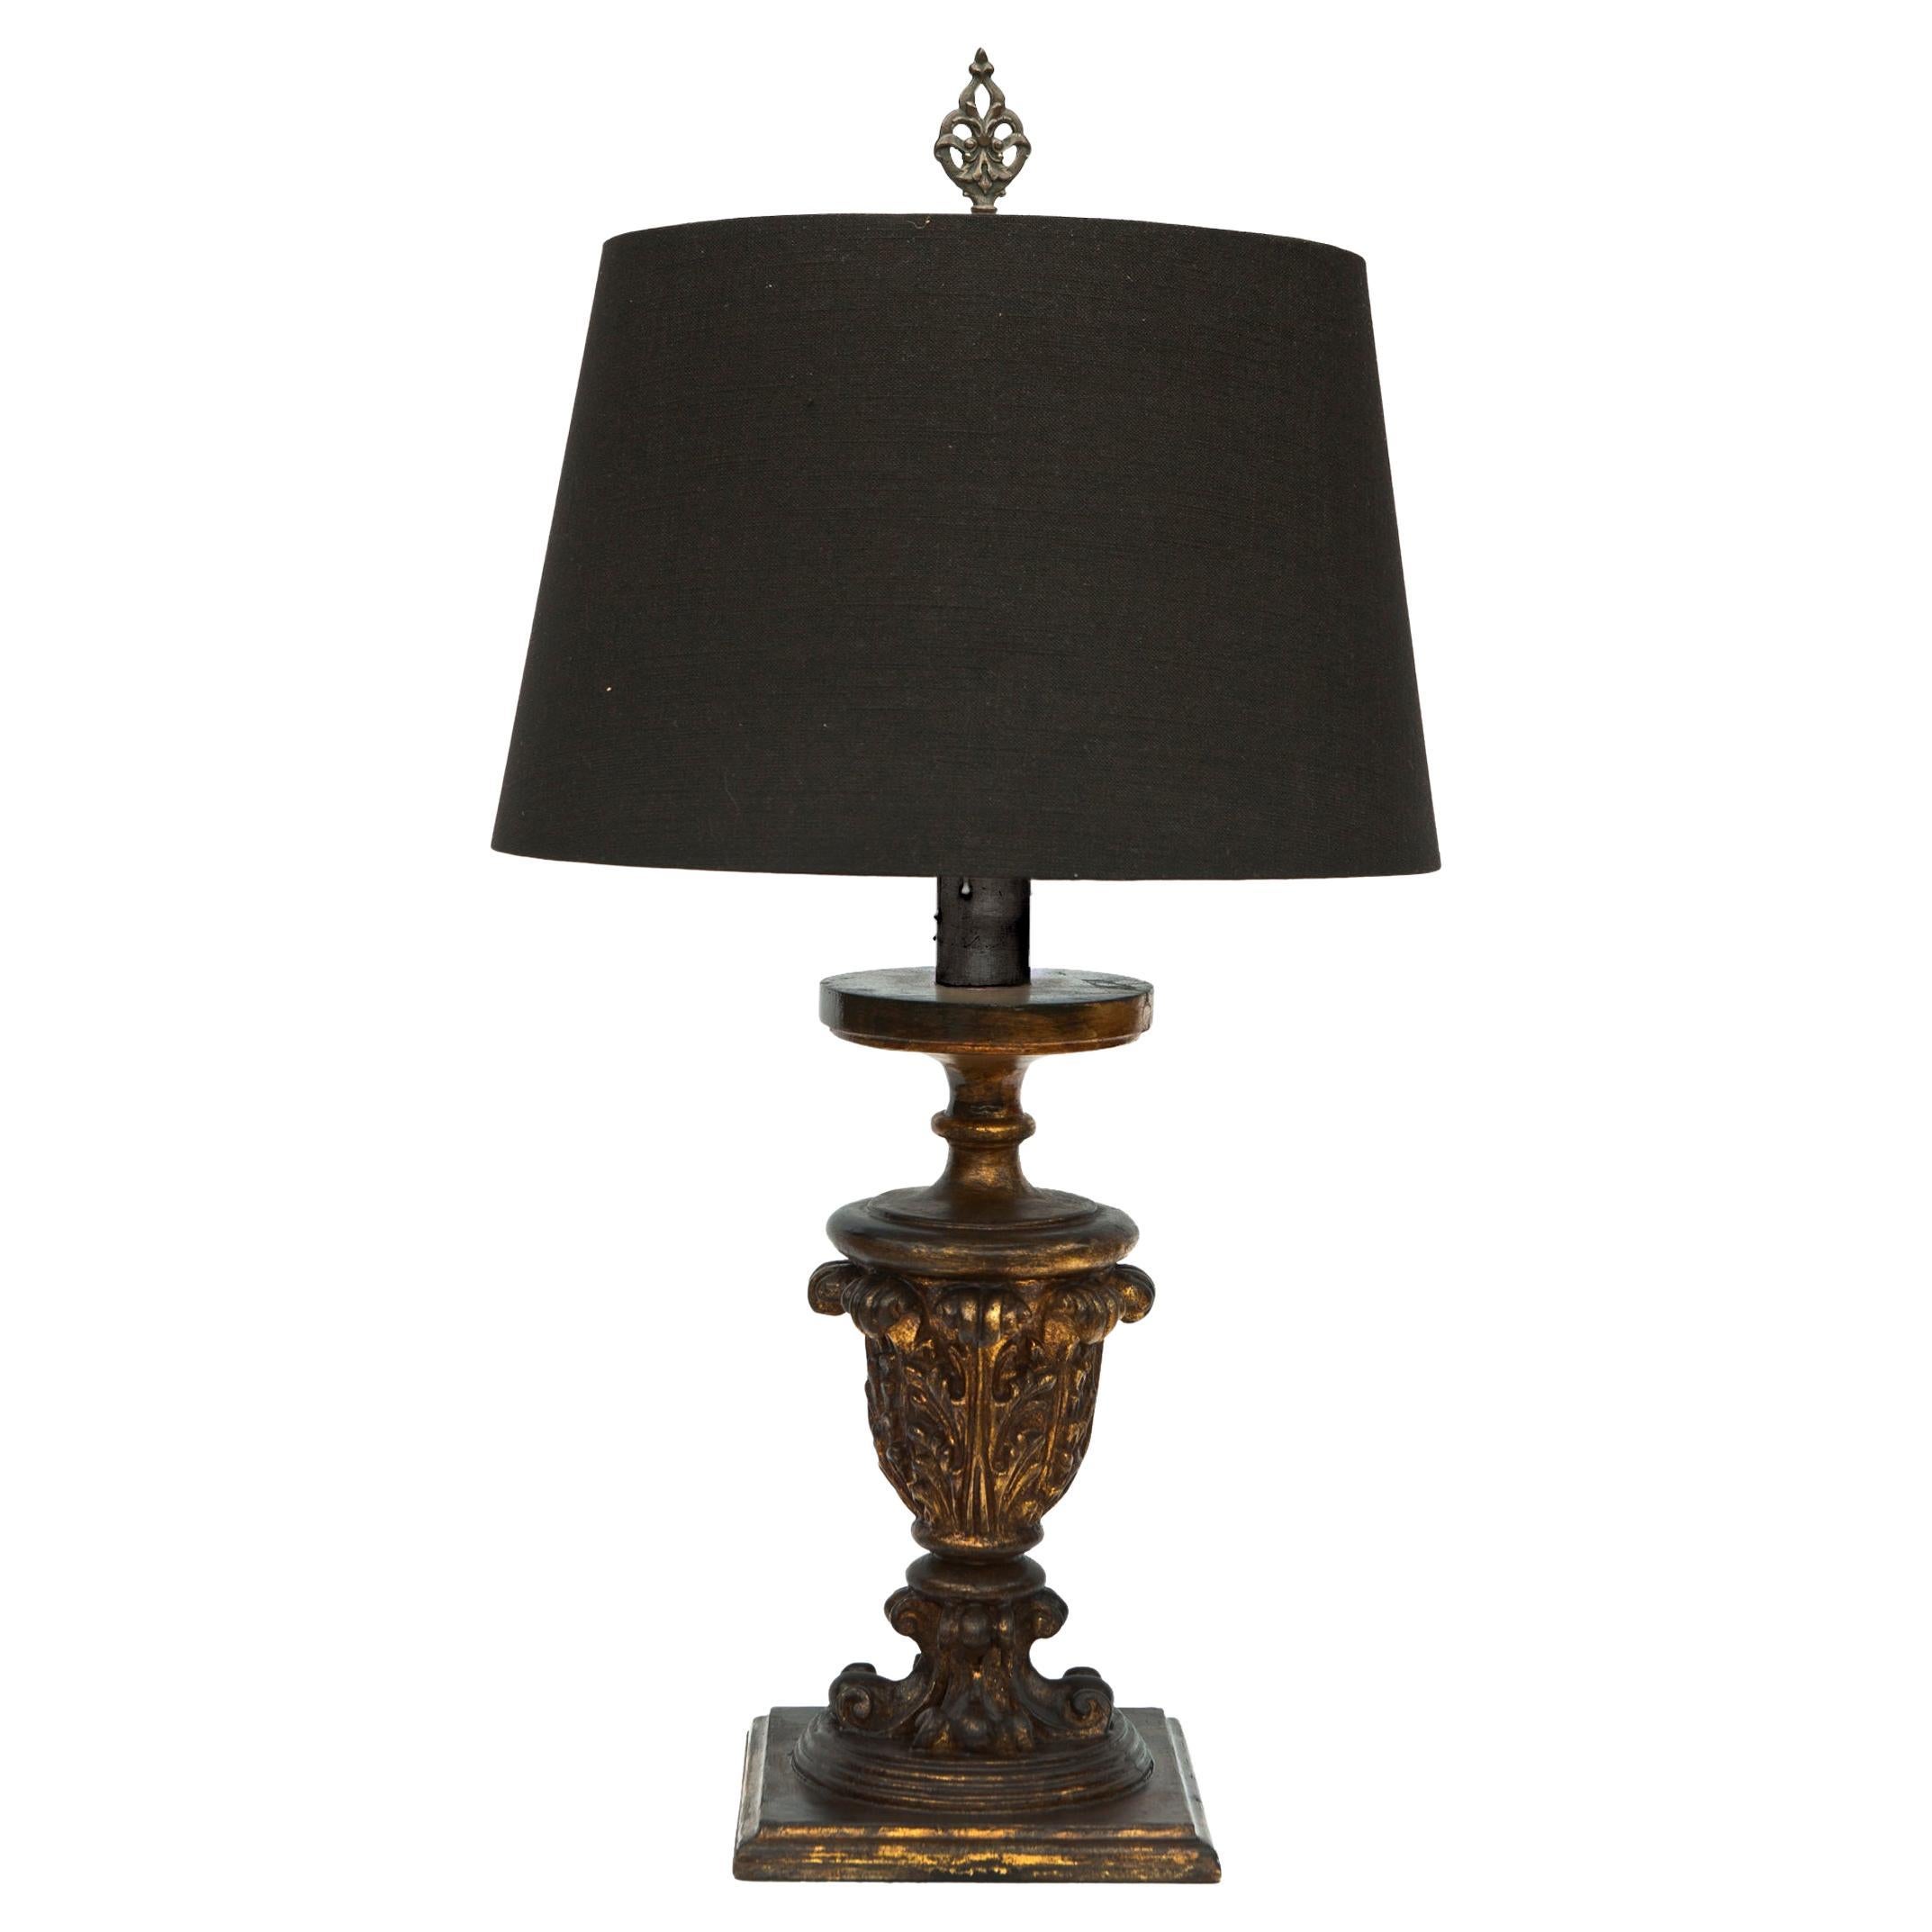 French wood table lamp, hand carved giltwood with ebony glaze over the gilt finish. Belgian linen the shade is available upon request.